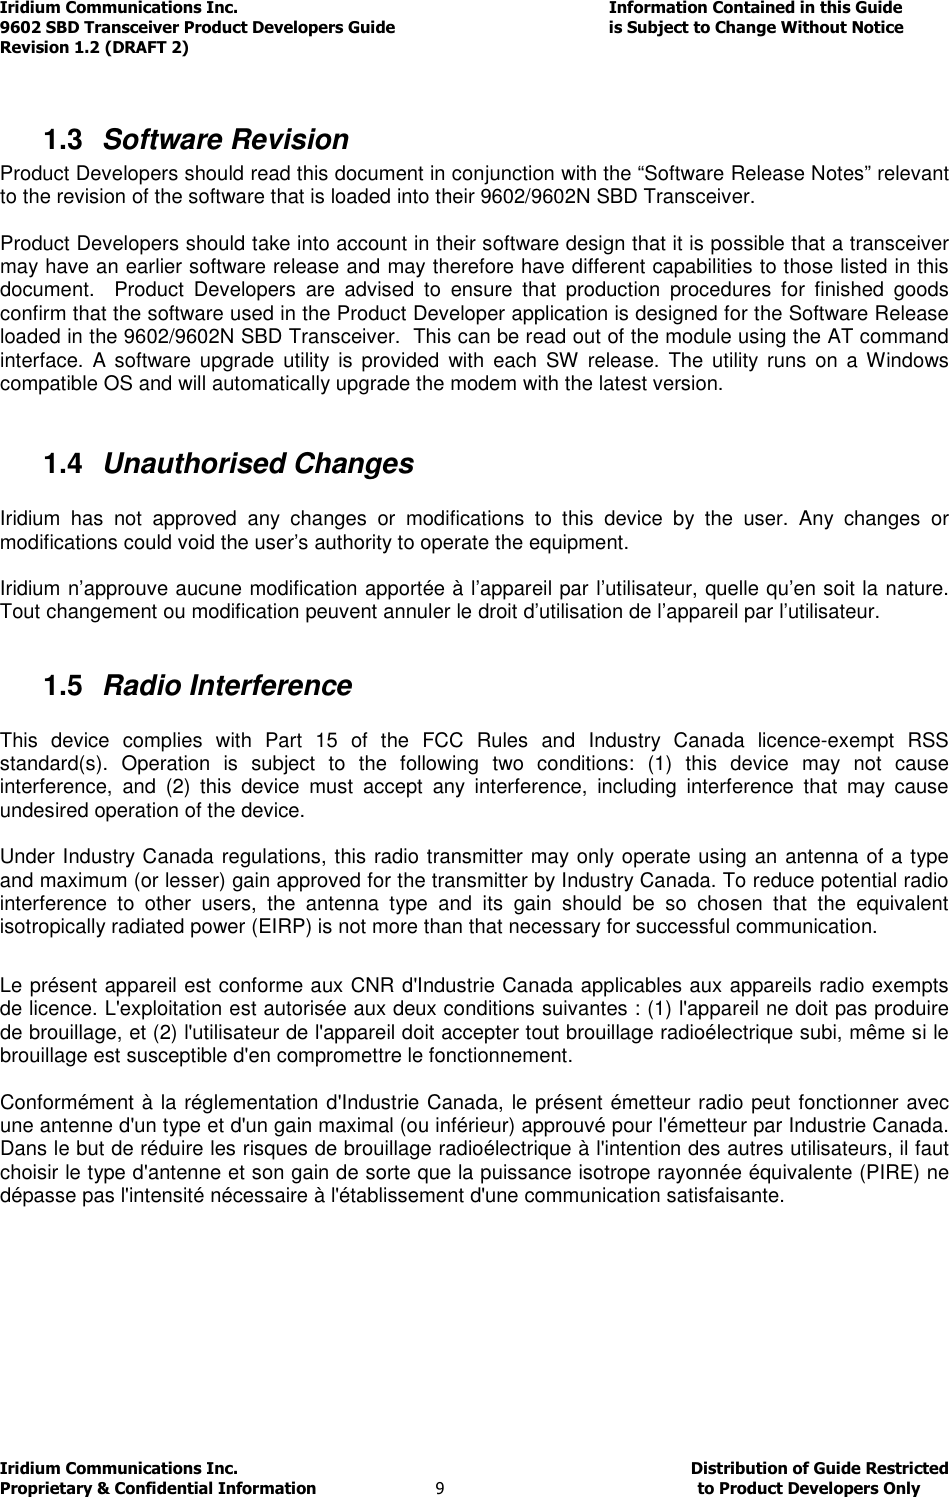 Iridium Communications Inc.                                      Information Contained in this Guide  9602 SBD Transceiver Product Developers Guide                                             is Subject to Change Without Notice  Revision 1.2 (DRAFT 2) Iridium Communications Inc.                                           Distribution of Guide Restricted Proprietary &amp; Confidential Information                         9                                                  to Product Developers Only            1.3  Software Revision Product Developers should read this document in conjunction with the “Software Release Notes” relevant to the revision of the software that is loaded into their 9602/9602N SBD Transceiver.  Product Developers should take into account in their software design that it is possible that a transceiver may have an earlier software release and may therefore have different capabilities to those listed in this document.    Product  Developers  are  advised  to  ensure  that  production  procedures  for  finished  goods confirm that the software used in the Product Developer application is designed for the Software Release loaded in the 9602/9602N SBD Transceiver.  This can be read out of the module using the AT command interface.  A software  upgrade  utility  is  provided  with each  SW release.  The  utility  runs  on a  Windows compatible OS and will automatically upgrade the modem with the latest version.   1.4  Unauthorised Changes  Iridium  has  not  approved  any  changes  or  modifications  to  this  device  by  the  user.  Any  changes  or modifications could void the user’s authority to operate the equipment.  Iridium n’approuve aucune modification apportée à l’appareil par l’utilisateur, quelle qu’en soit la nature. Tout changement ou modification peuvent annuler le droit d’utilisation de l’appareil par l’utilisateur.  1.5  Radio Interference  This  device  complies  with  Part  15  of  the  FCC  Rules  and  Industry  Canada  licence-exempt  RSS standard(s).  Operation  is  subject  to  the  following  two  conditions:  (1)  this  device  may  not  cause interference,  and  (2)  this  device  must  accept  any  interference,  including  interference  that  may  cause undesired operation of the device.  Under Industry Canada regulations, this radio transmitter may only operate using an antenna of a type and maximum (or lesser) gain approved for the transmitter by Industry Canada. To reduce potential radio interference  to  other  users,  the  antenna  type  and  its  gain  should  be  so  chosen  that  the  equivalent isotropically radiated power (EIRP) is not more than that necessary for successful communication.  Le présent appareil est conforme aux CNR d&apos;Industrie Canada applicables aux appareils radio exempts de licence. L&apos;exploitation est autorisée aux deux conditions suivantes : (1) l&apos;appareil ne doit pas produire de brouillage, et (2) l&apos;utilisateur de l&apos;appareil doit accepter tout brouillage radioélectrique subi, même si le brouillage est susceptible d&apos;en compromettre le fonctionnement.  Conformément à la réglementation d&apos;Industrie Canada, le présent émetteur radio peut fonctionner avec une antenne d&apos;un type et d&apos;un gain maximal (ou inférieur) approuvé pour l&apos;émetteur par Industrie Canada. Dans le but de réduire les risques de brouillage radioélectrique à l&apos;intention des autres utilisateurs, il faut choisir le type d&apos;antenne et son gain de sorte que la puissance isotrope rayonnée équivalente (PIRE) ne dépasse pas l&apos;intensité nécessaire à l&apos;établissement d&apos;une communication satisfaisante.     